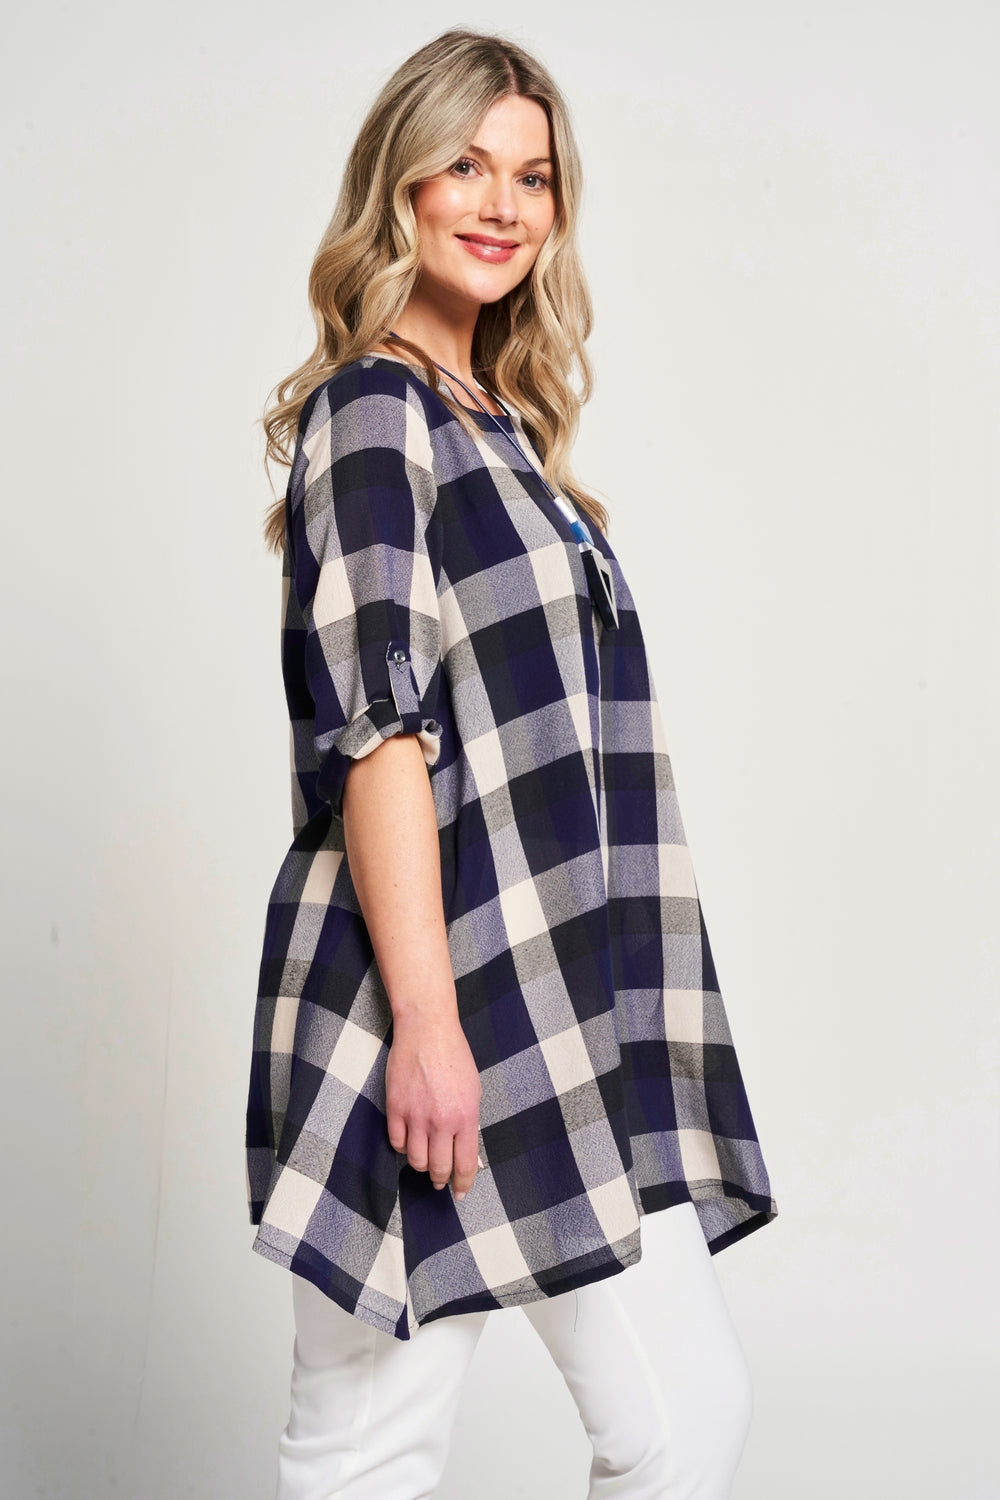 Saloos Check Tunic with Necklace